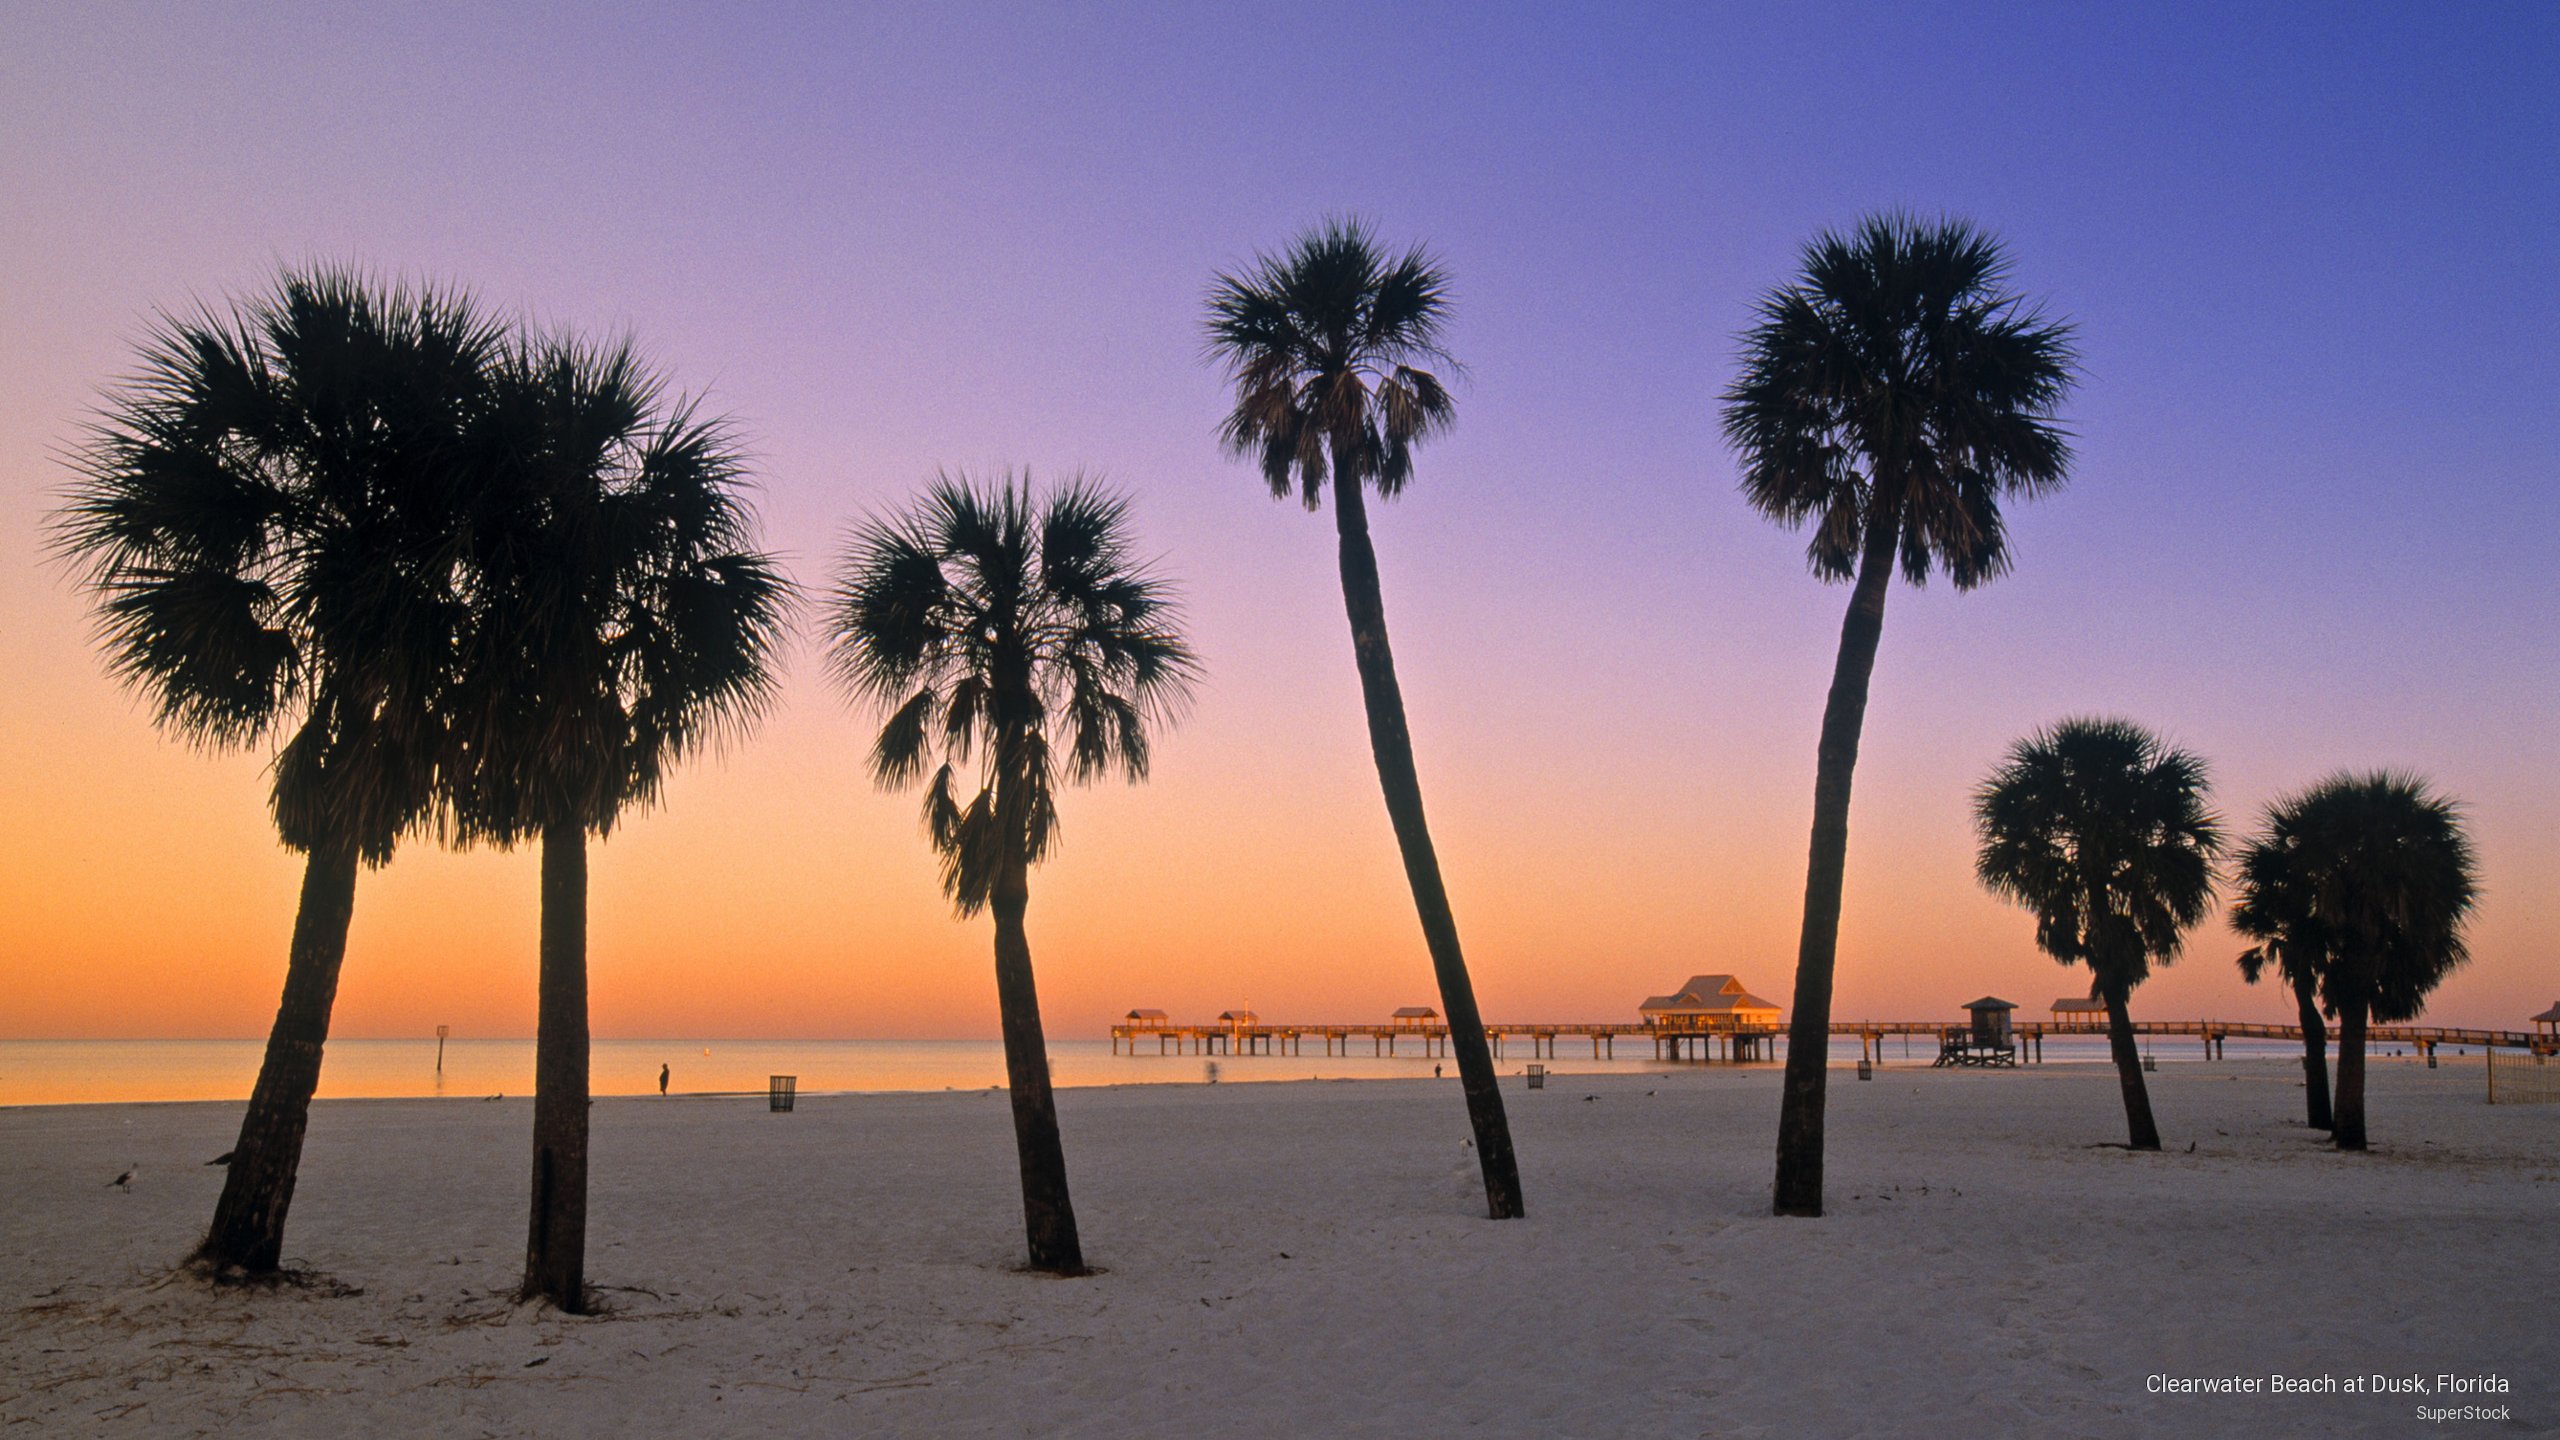 Clearwater Beach At Dusk Florida